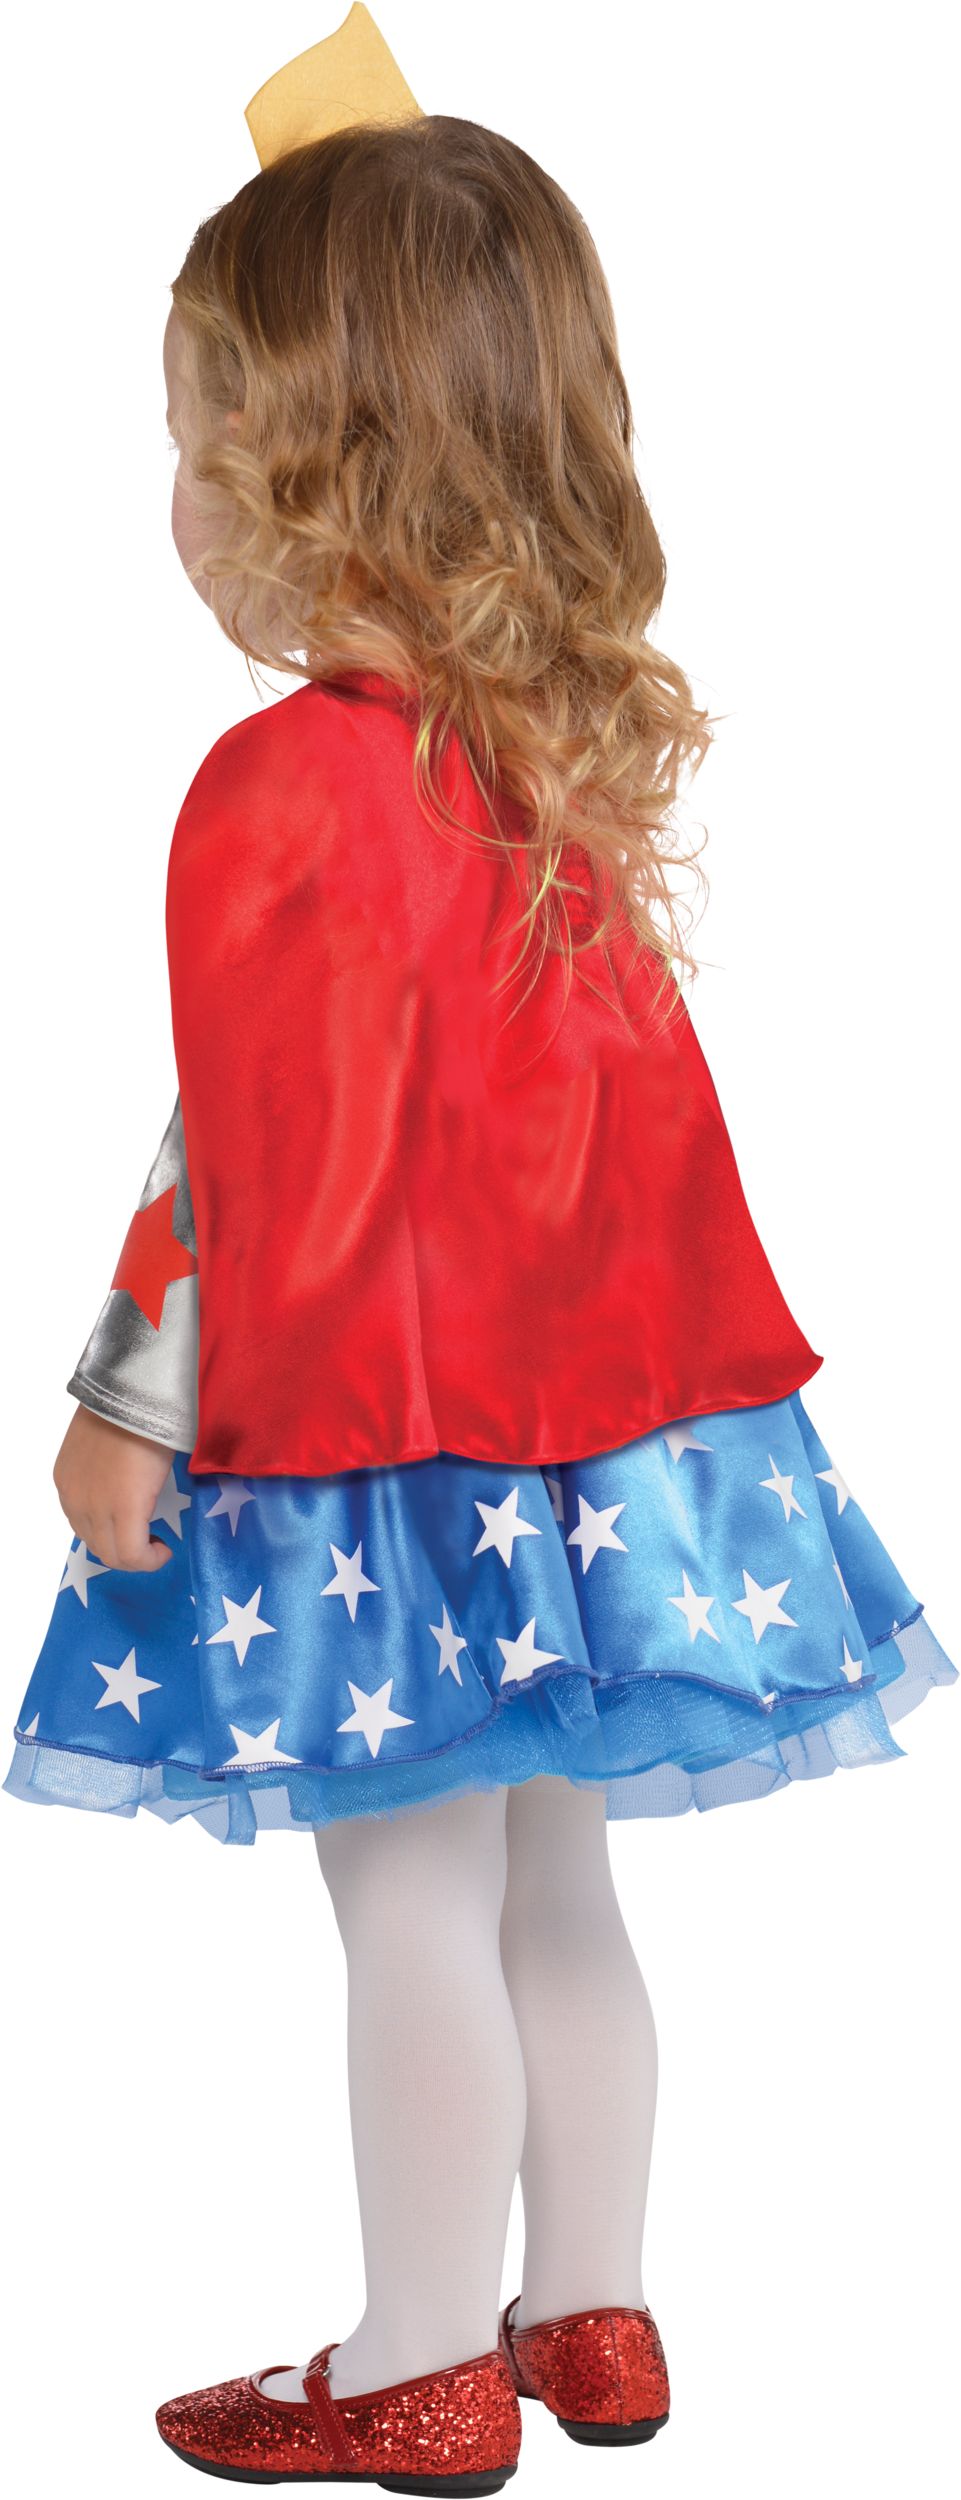 Wonder Woman Red/Blue Dress Costume with Accessories for Halloween